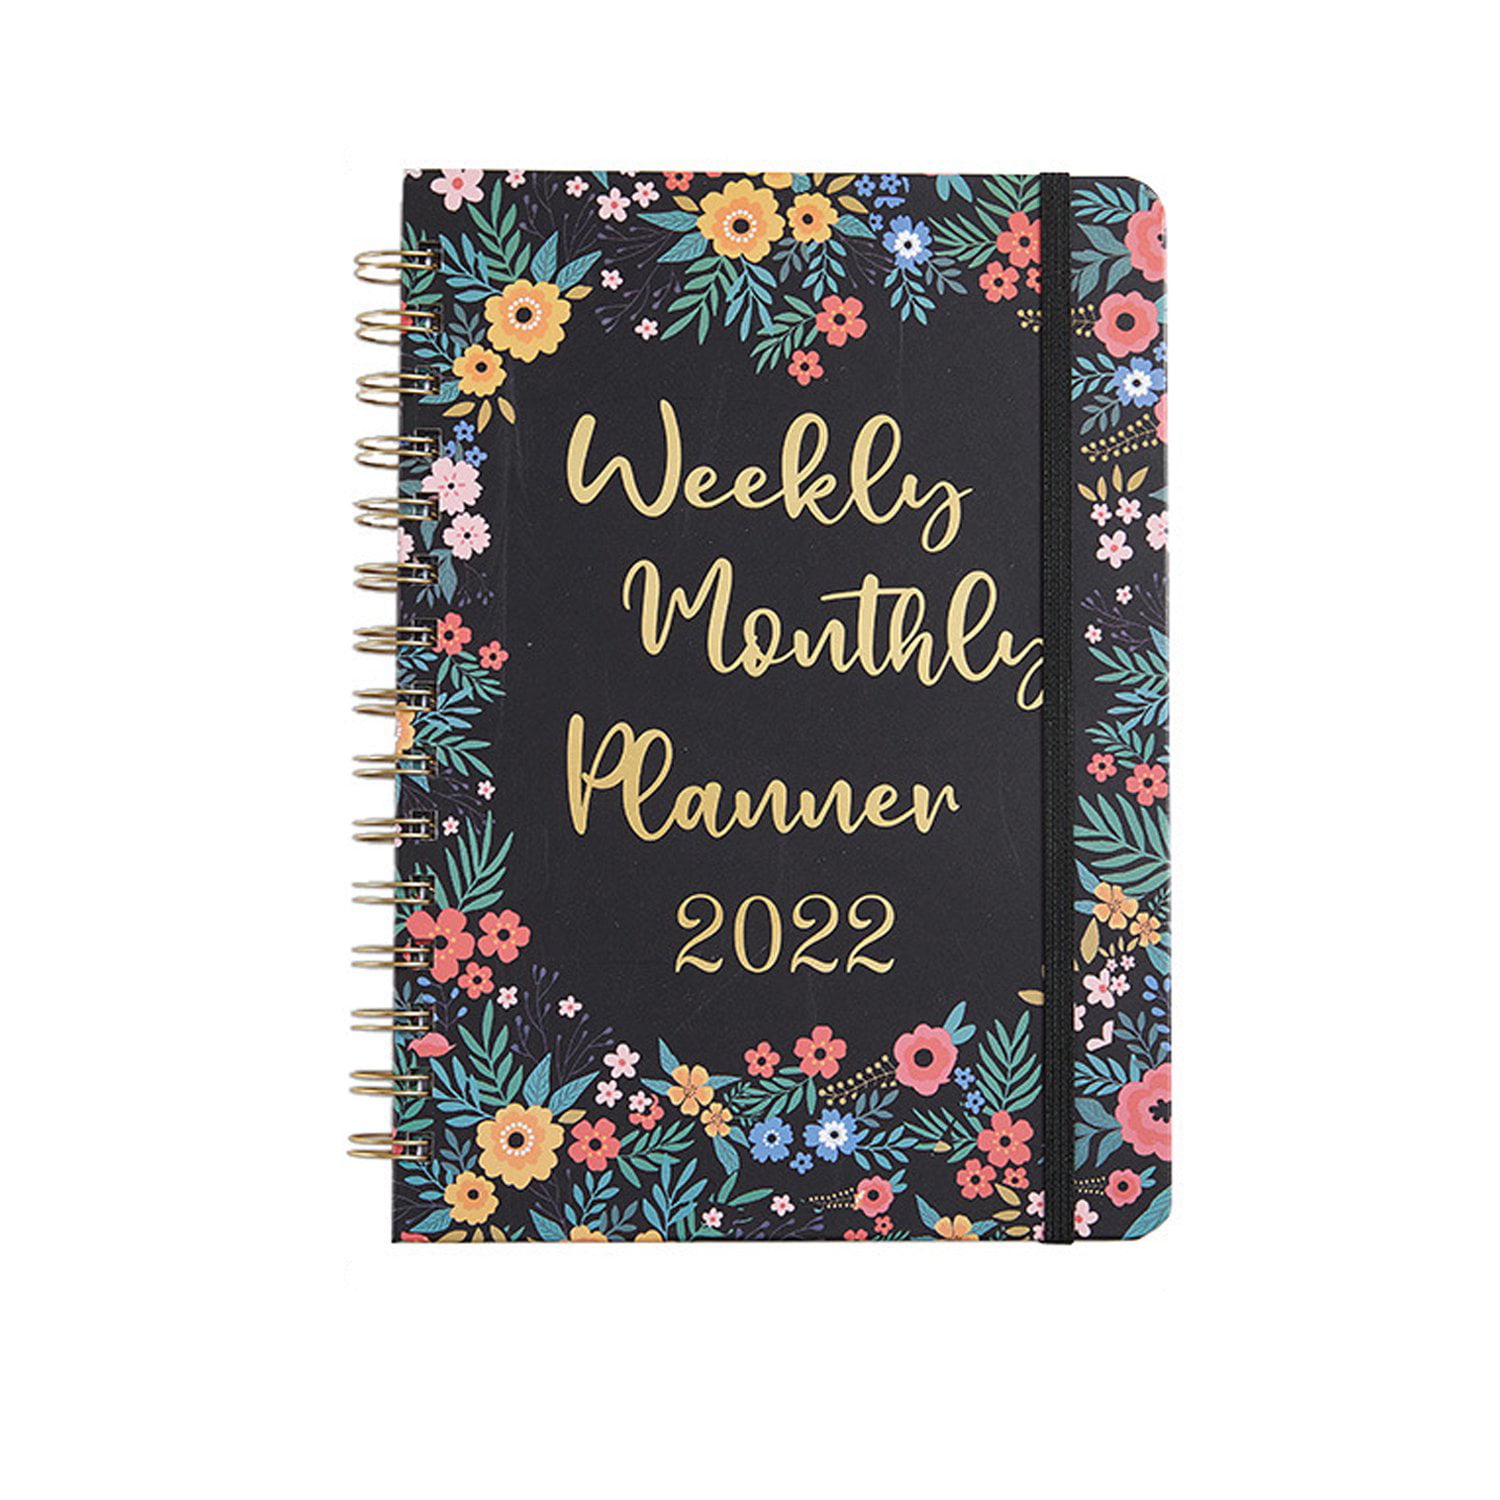 Elastic Closure 8.4 x 6.3 January Inner Pocket and Premium Thick Paper 2022 Agenda with Twin-wire Binding 2022 Planner 2022 Planner Weekly and Monthly with Flexible Hard Cover December 2022 